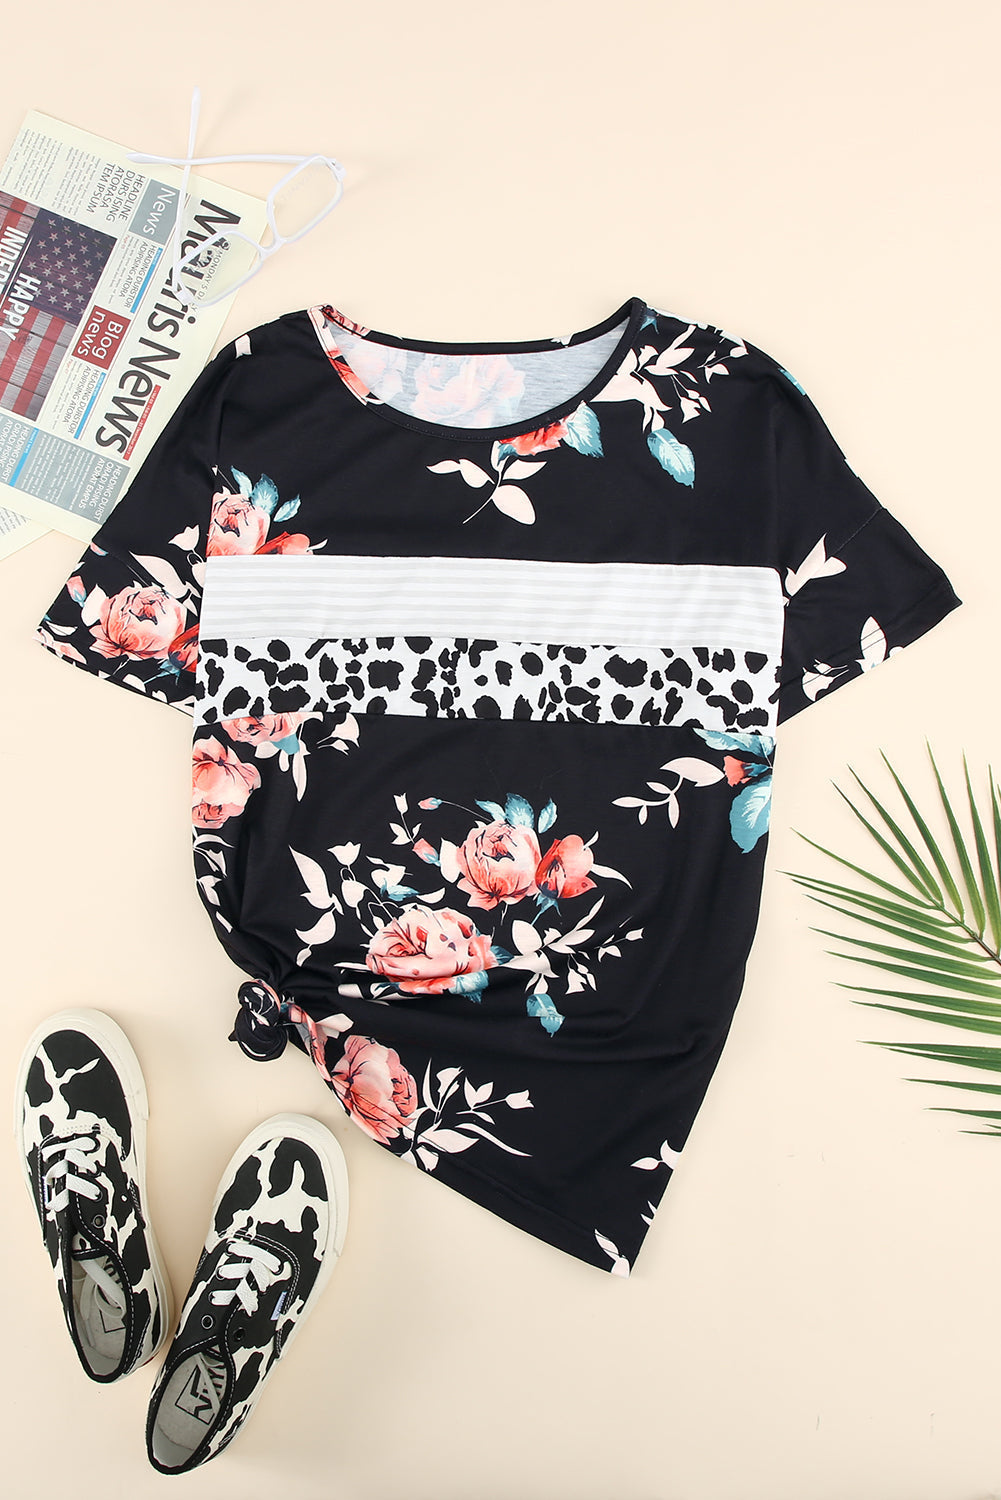 Floral Round Neck Short Sleeve Tee Print on any thing USA/STOD clothes